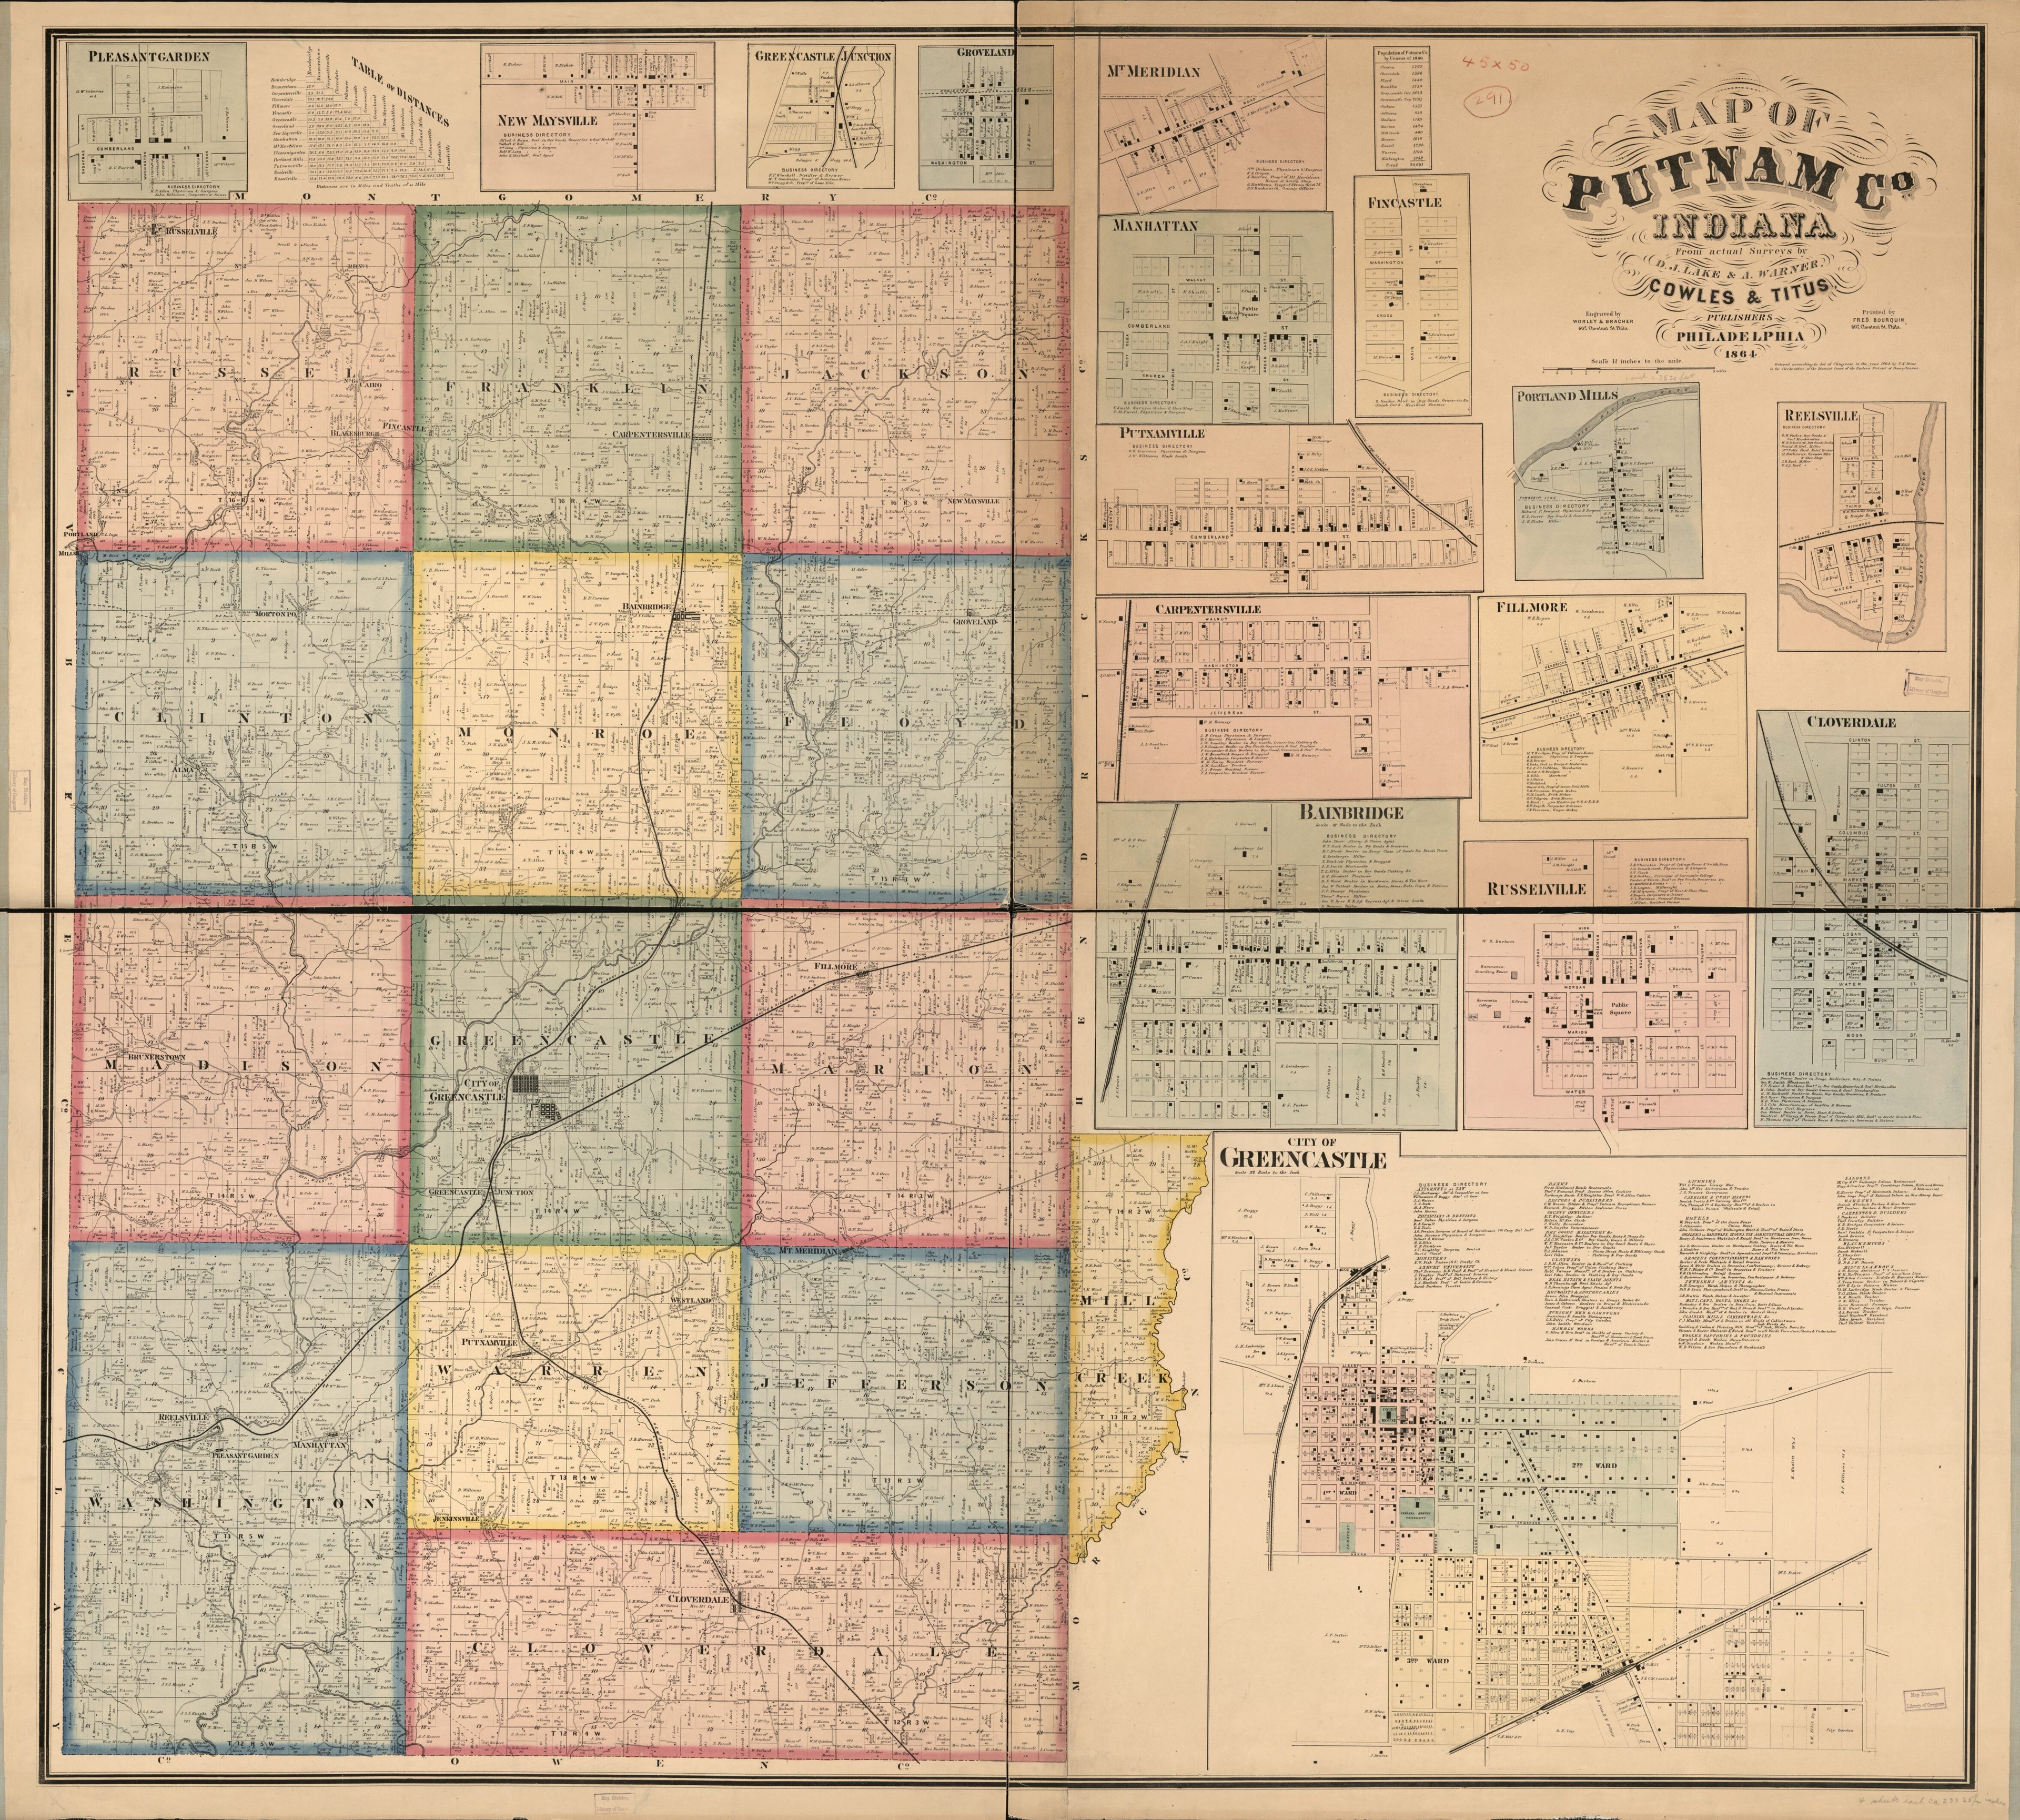 This old map of Map of Putnam Co., Indiana from 1864 was created by D. J. Lake, A. Warner,  Worley &amp; Bracher in 1864